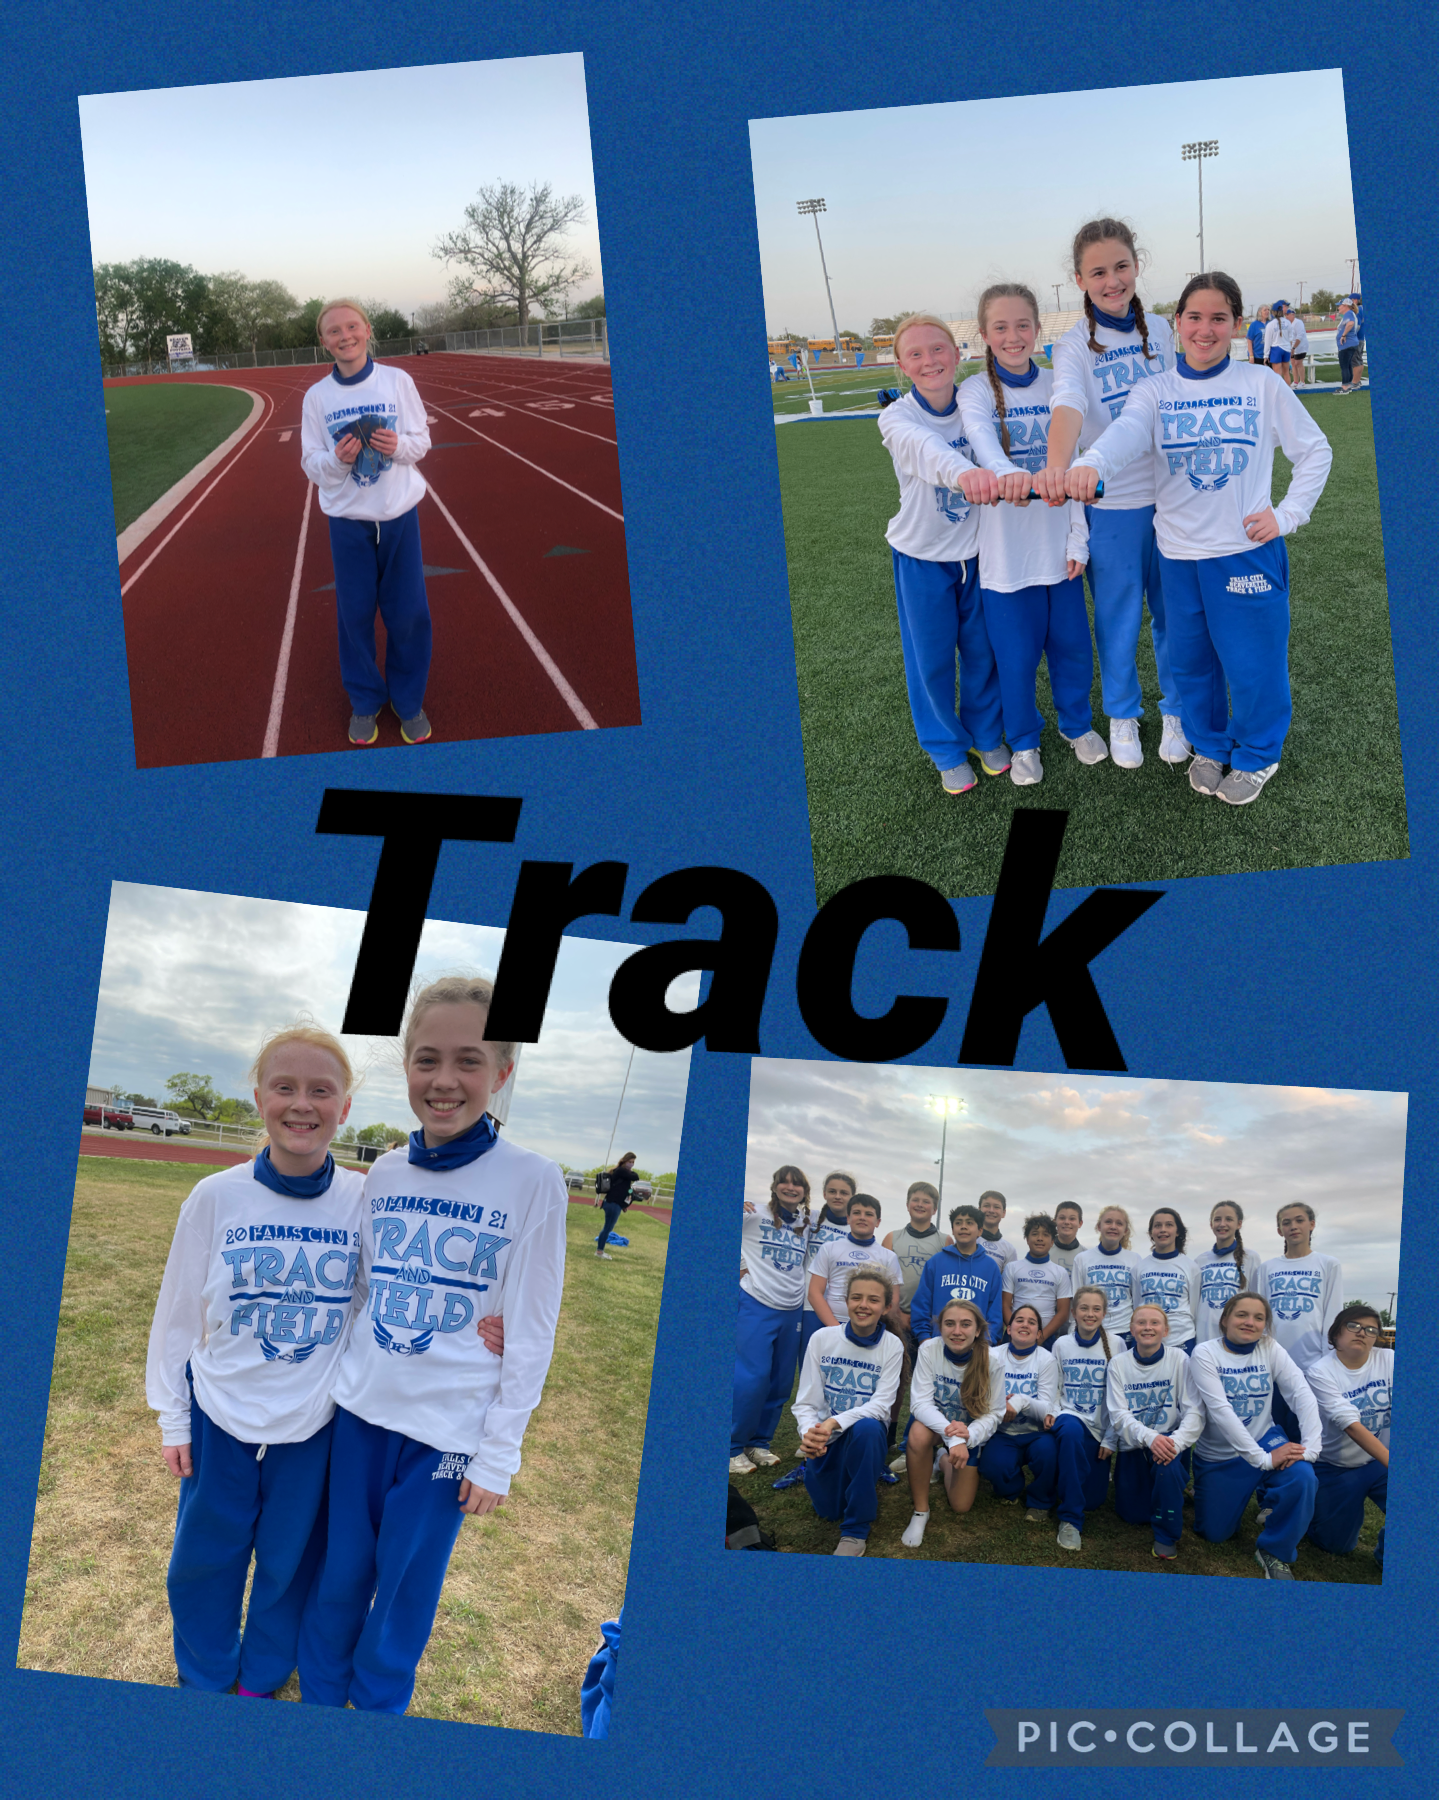 I had so much fun doing my first year of track 